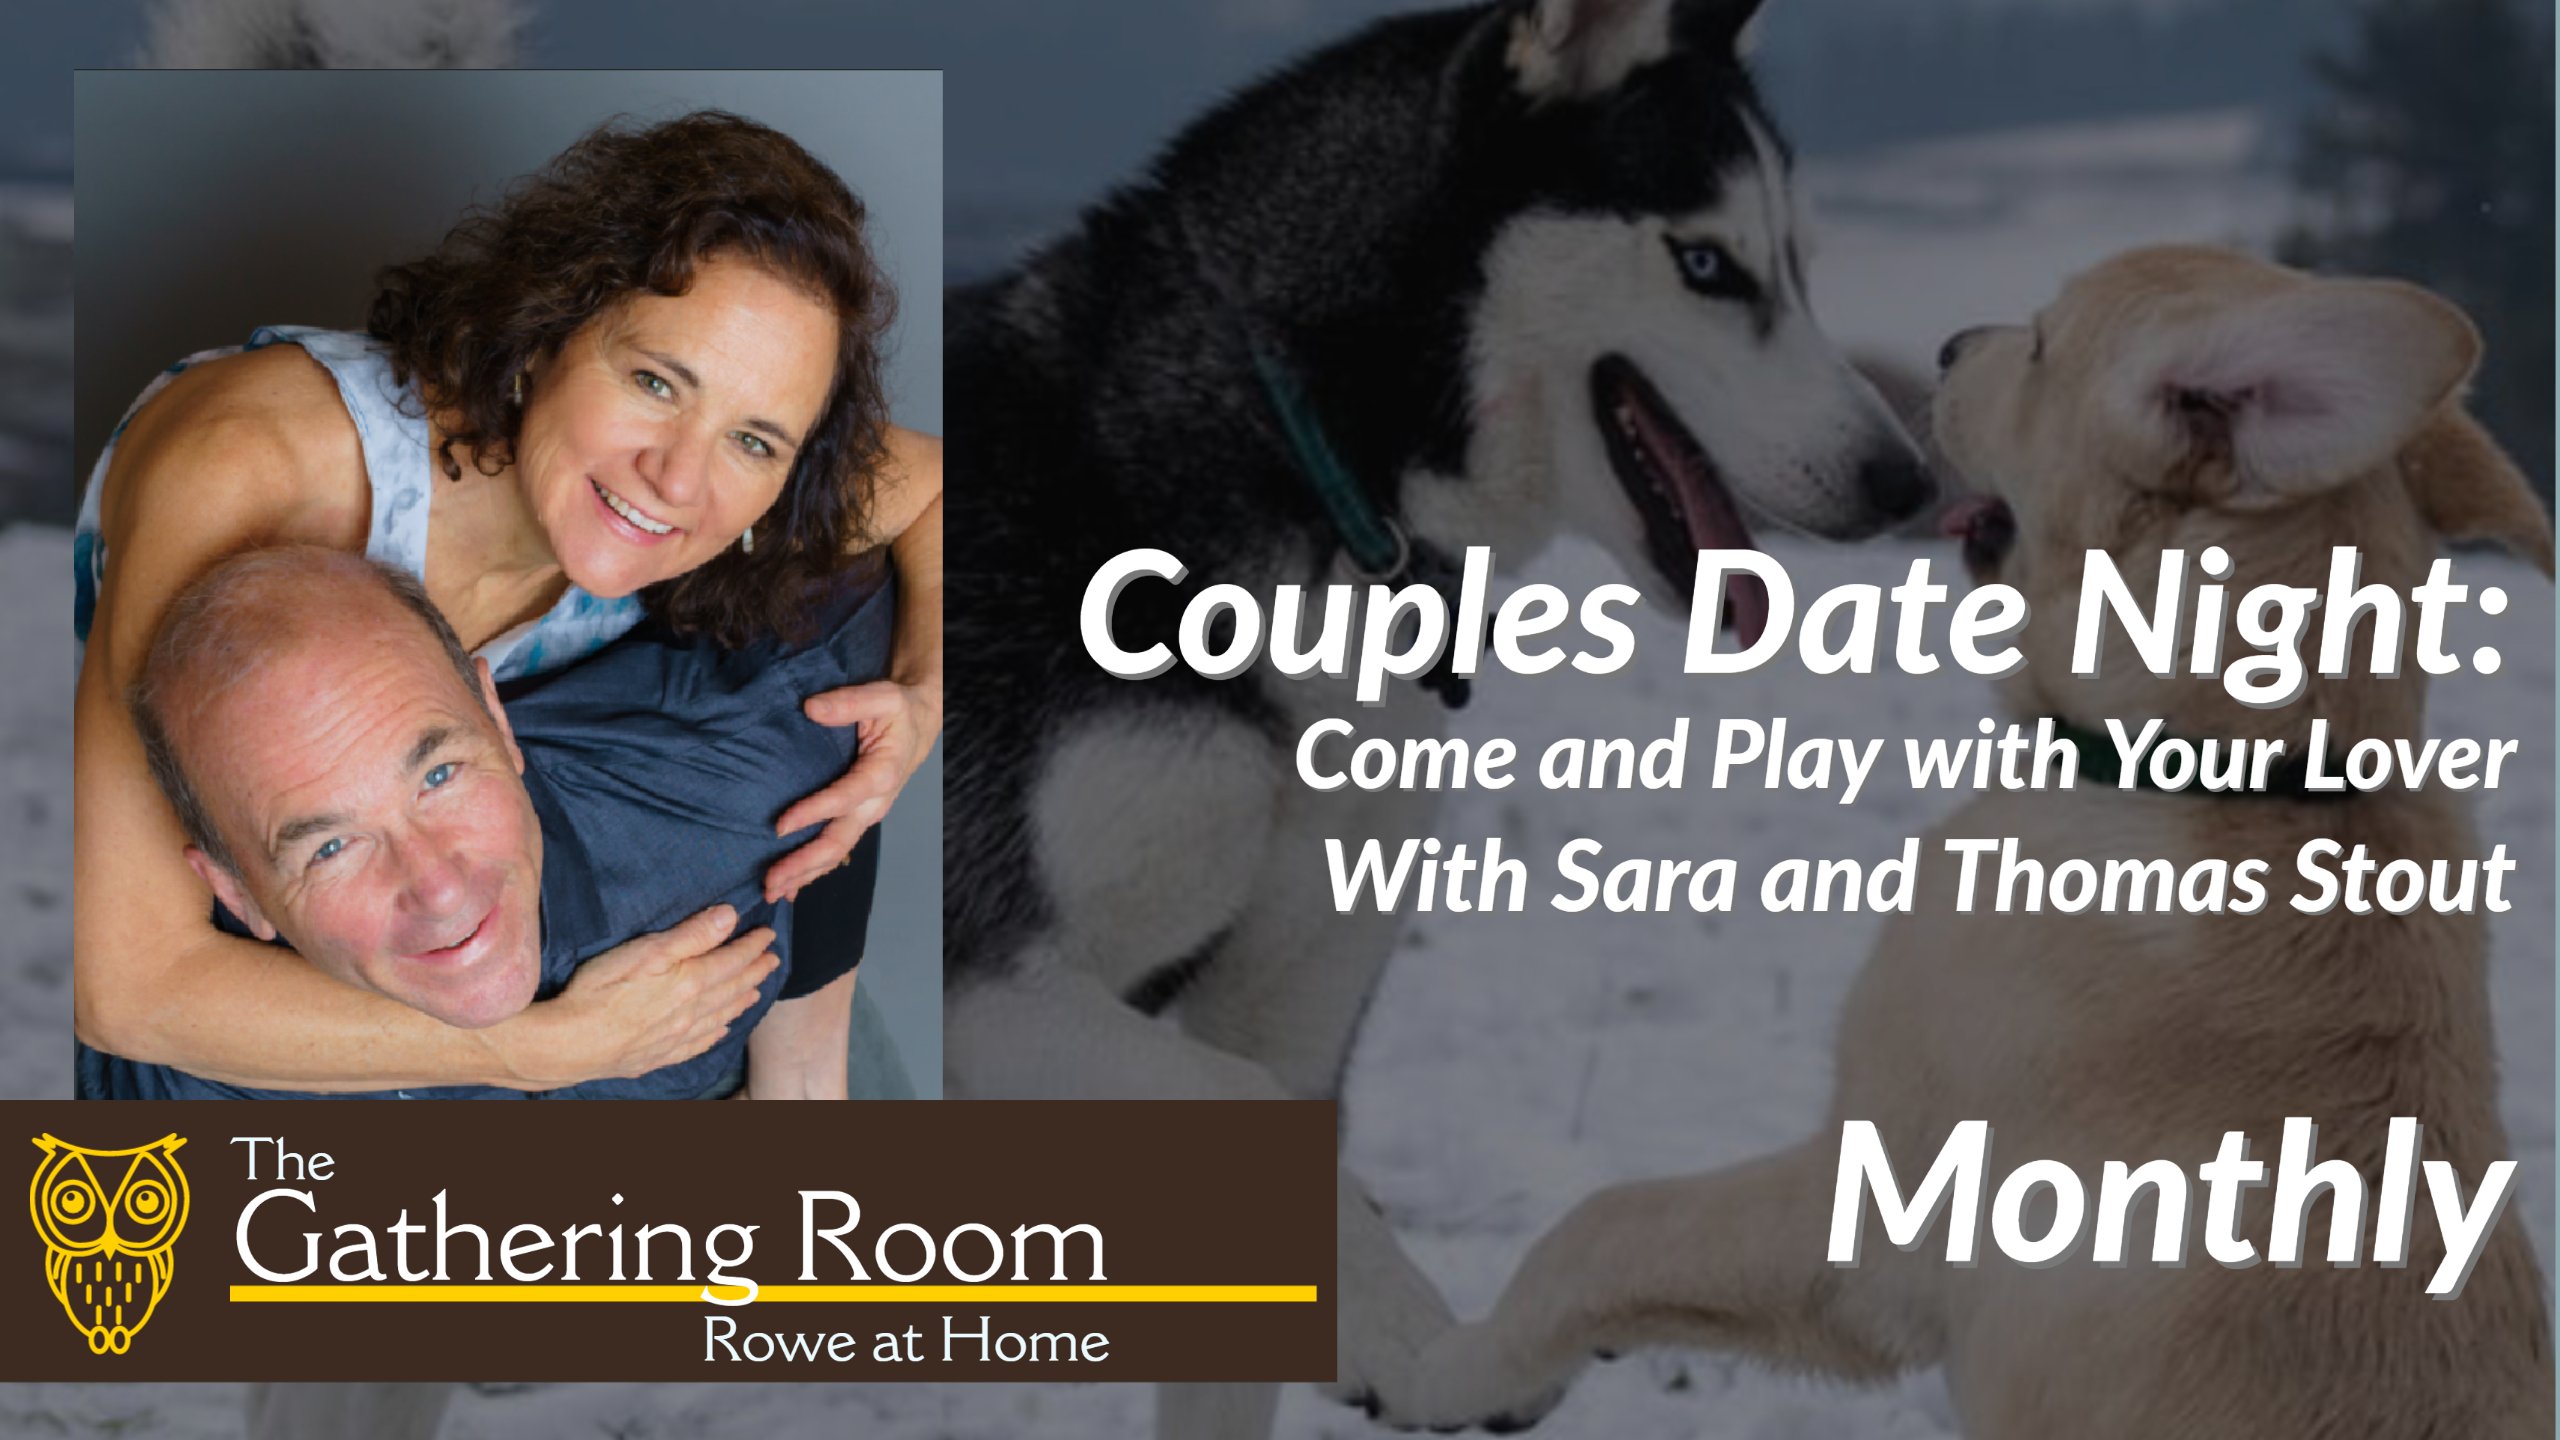 Couples Date Night: Come and Play with Your Lover